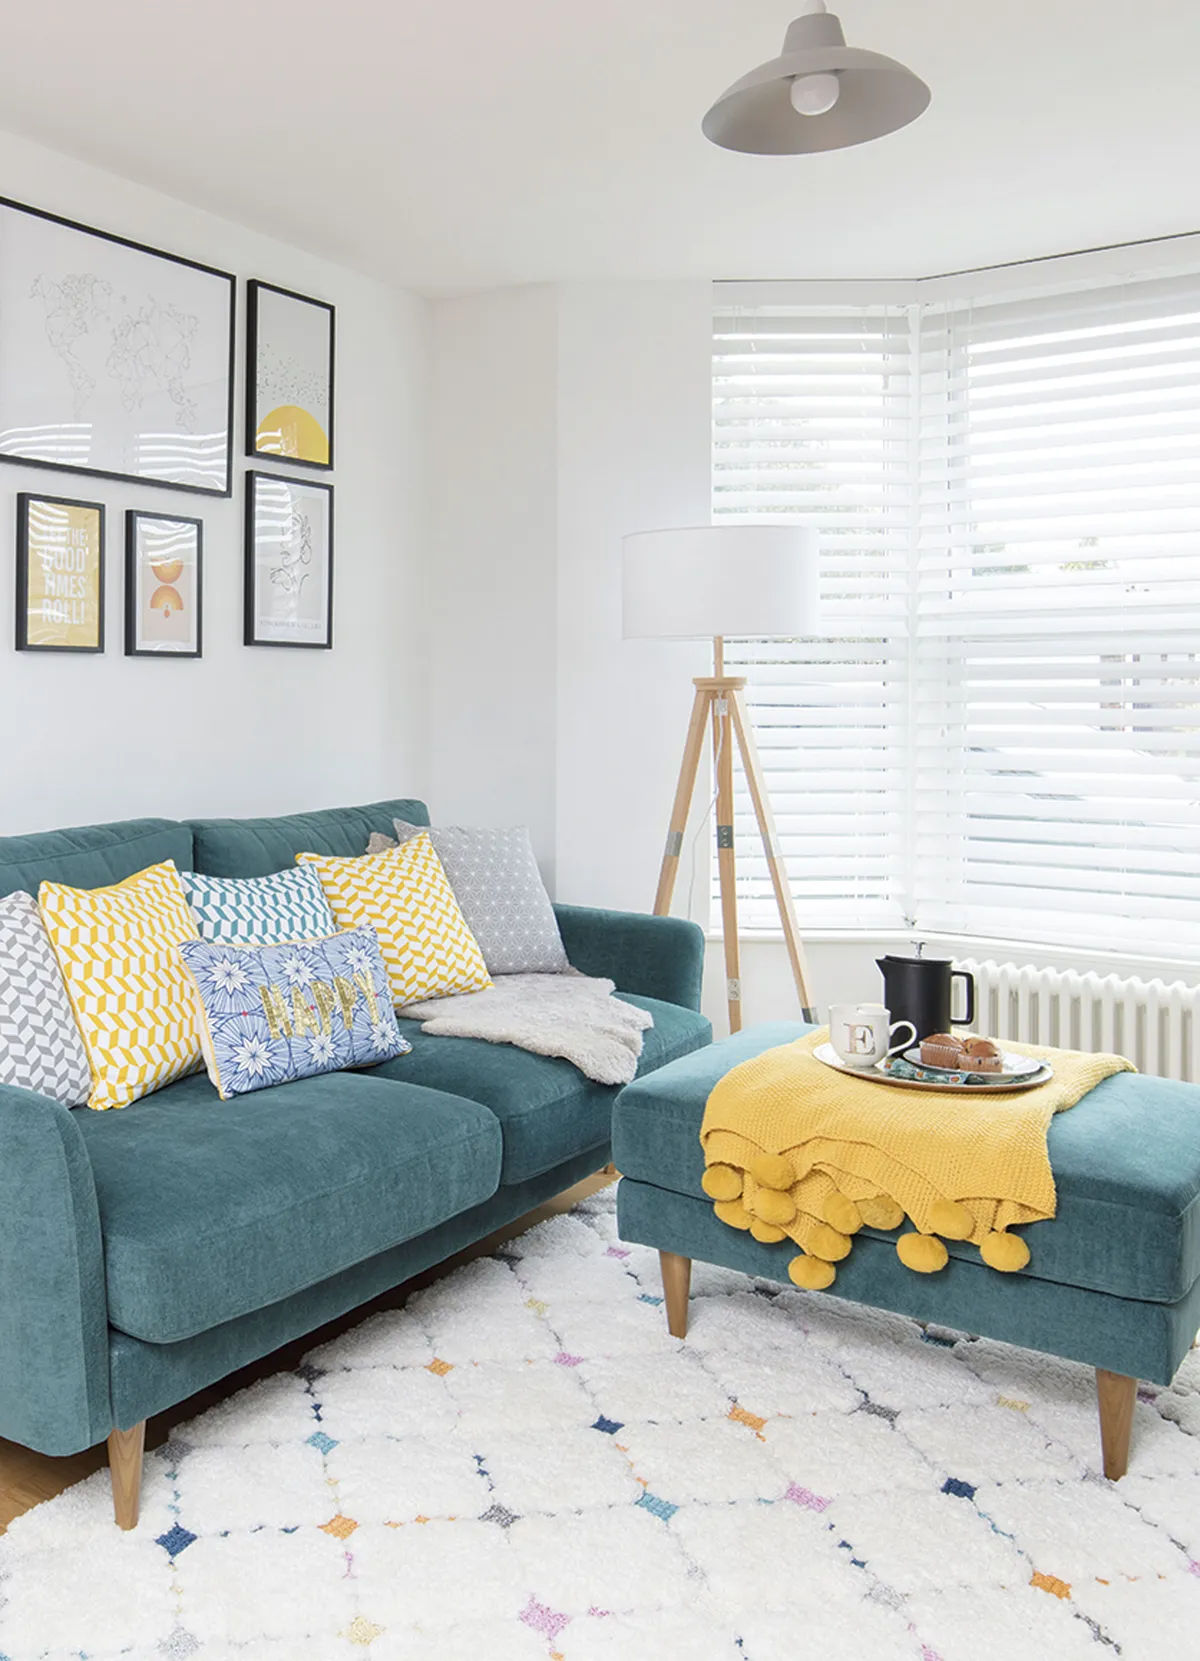 Living room makeover: 'We were inspired by bright Scandi designs'